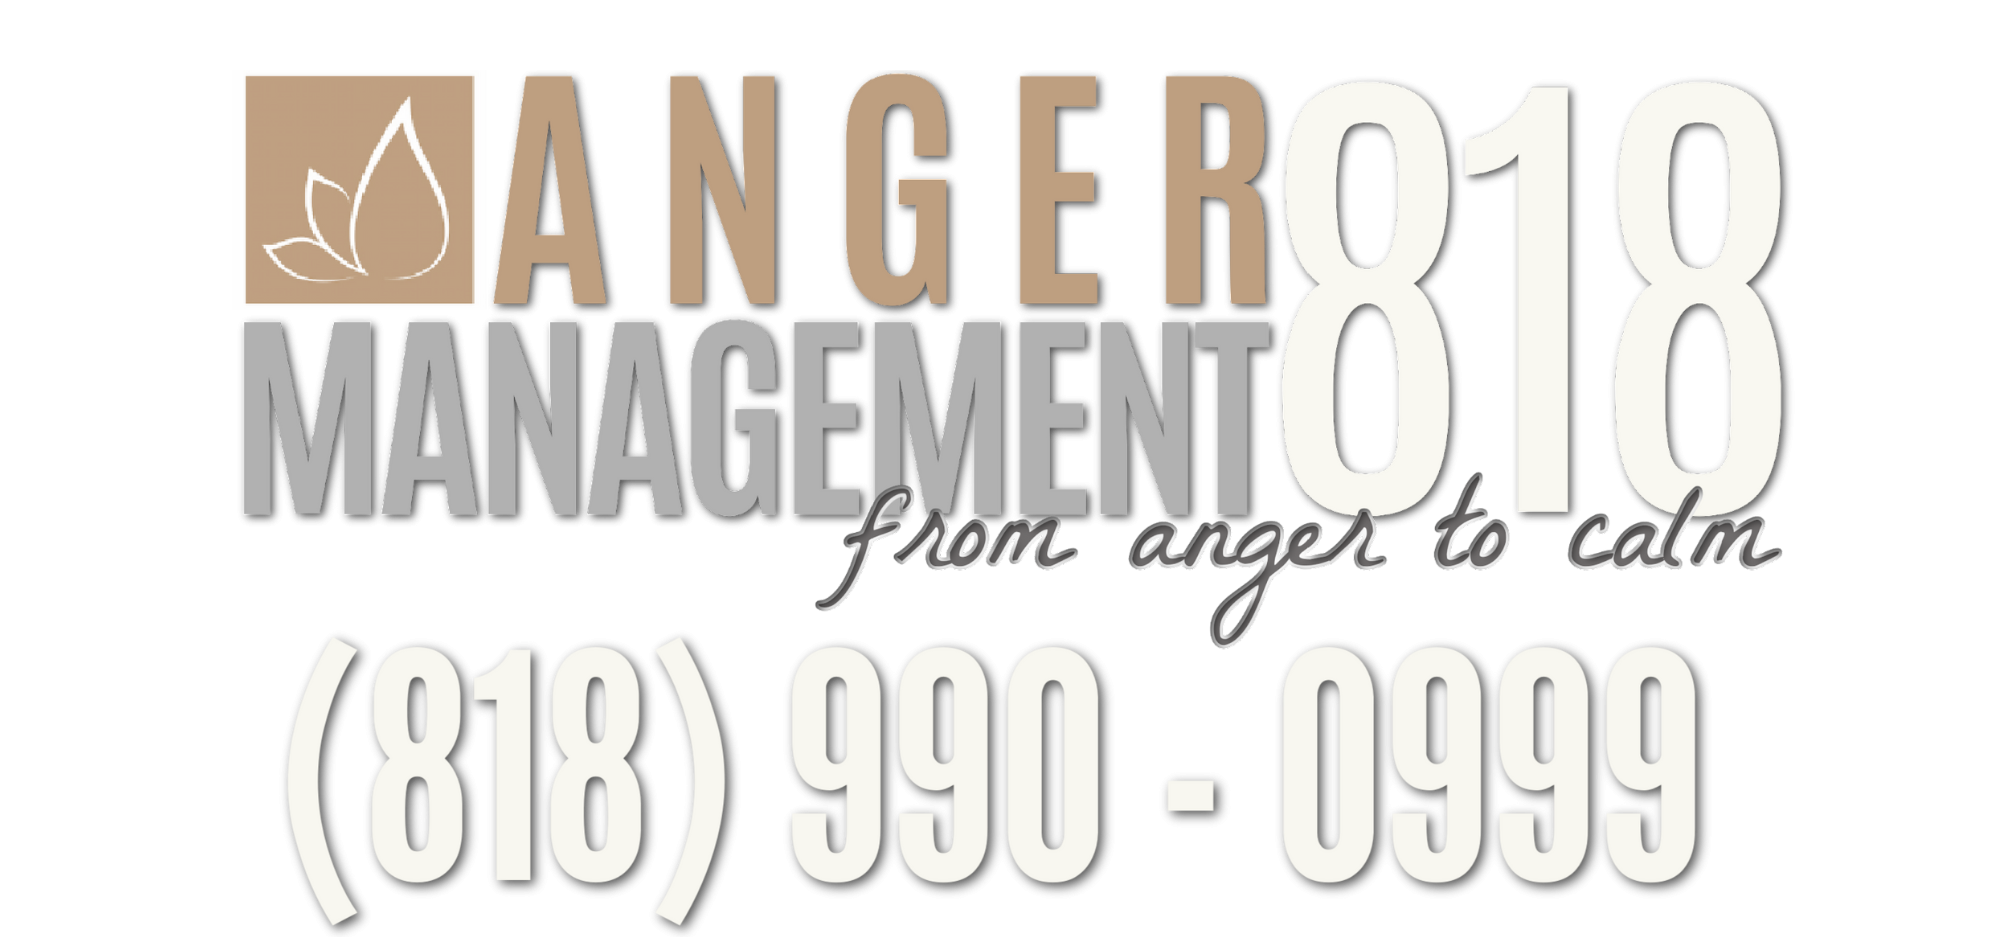 Anger management counseling logo in Los Angeles.